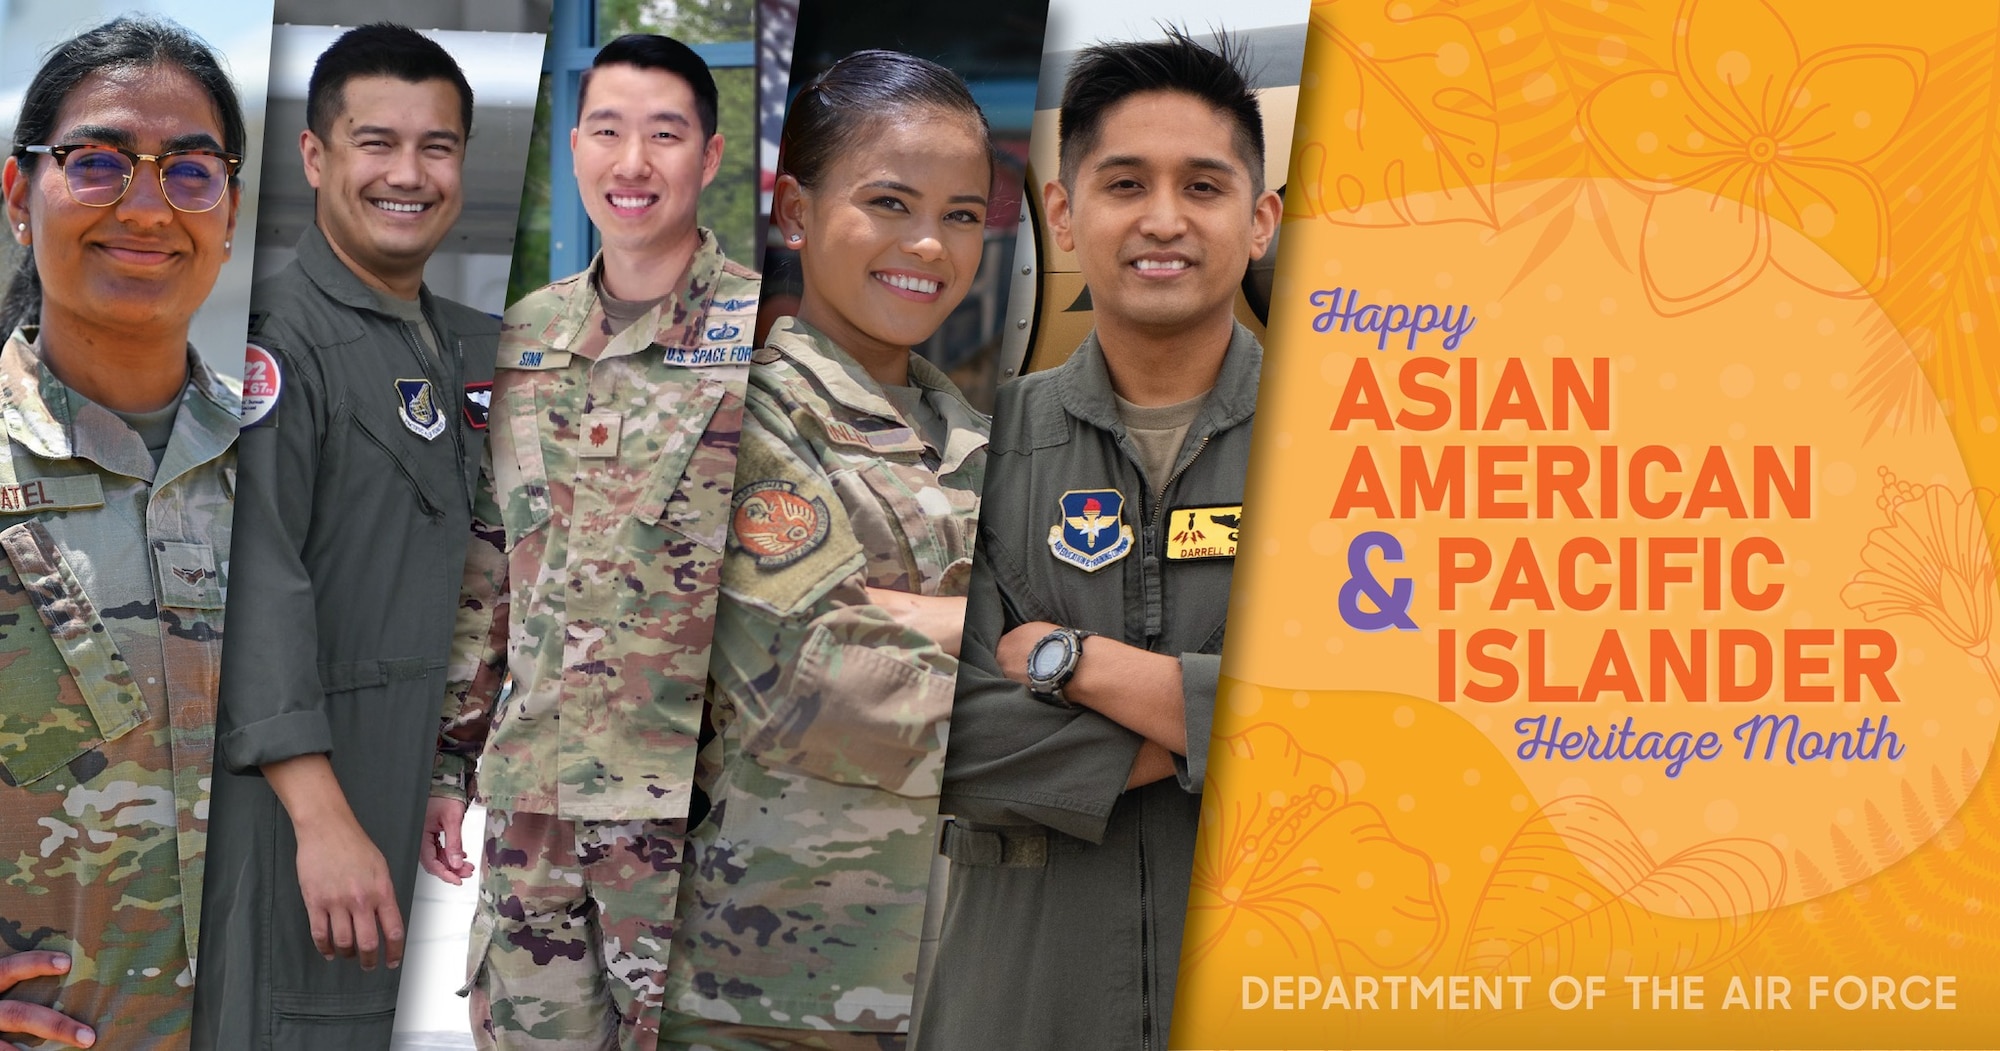 During the month of May, the DOD recognizes Asian American and Pacific Islander Heritage Month to honor the legacy of the Asian and Pacific Islander community. This graphic was created to honor AAPI Heritage Month. (U.S. Air Force grapic)